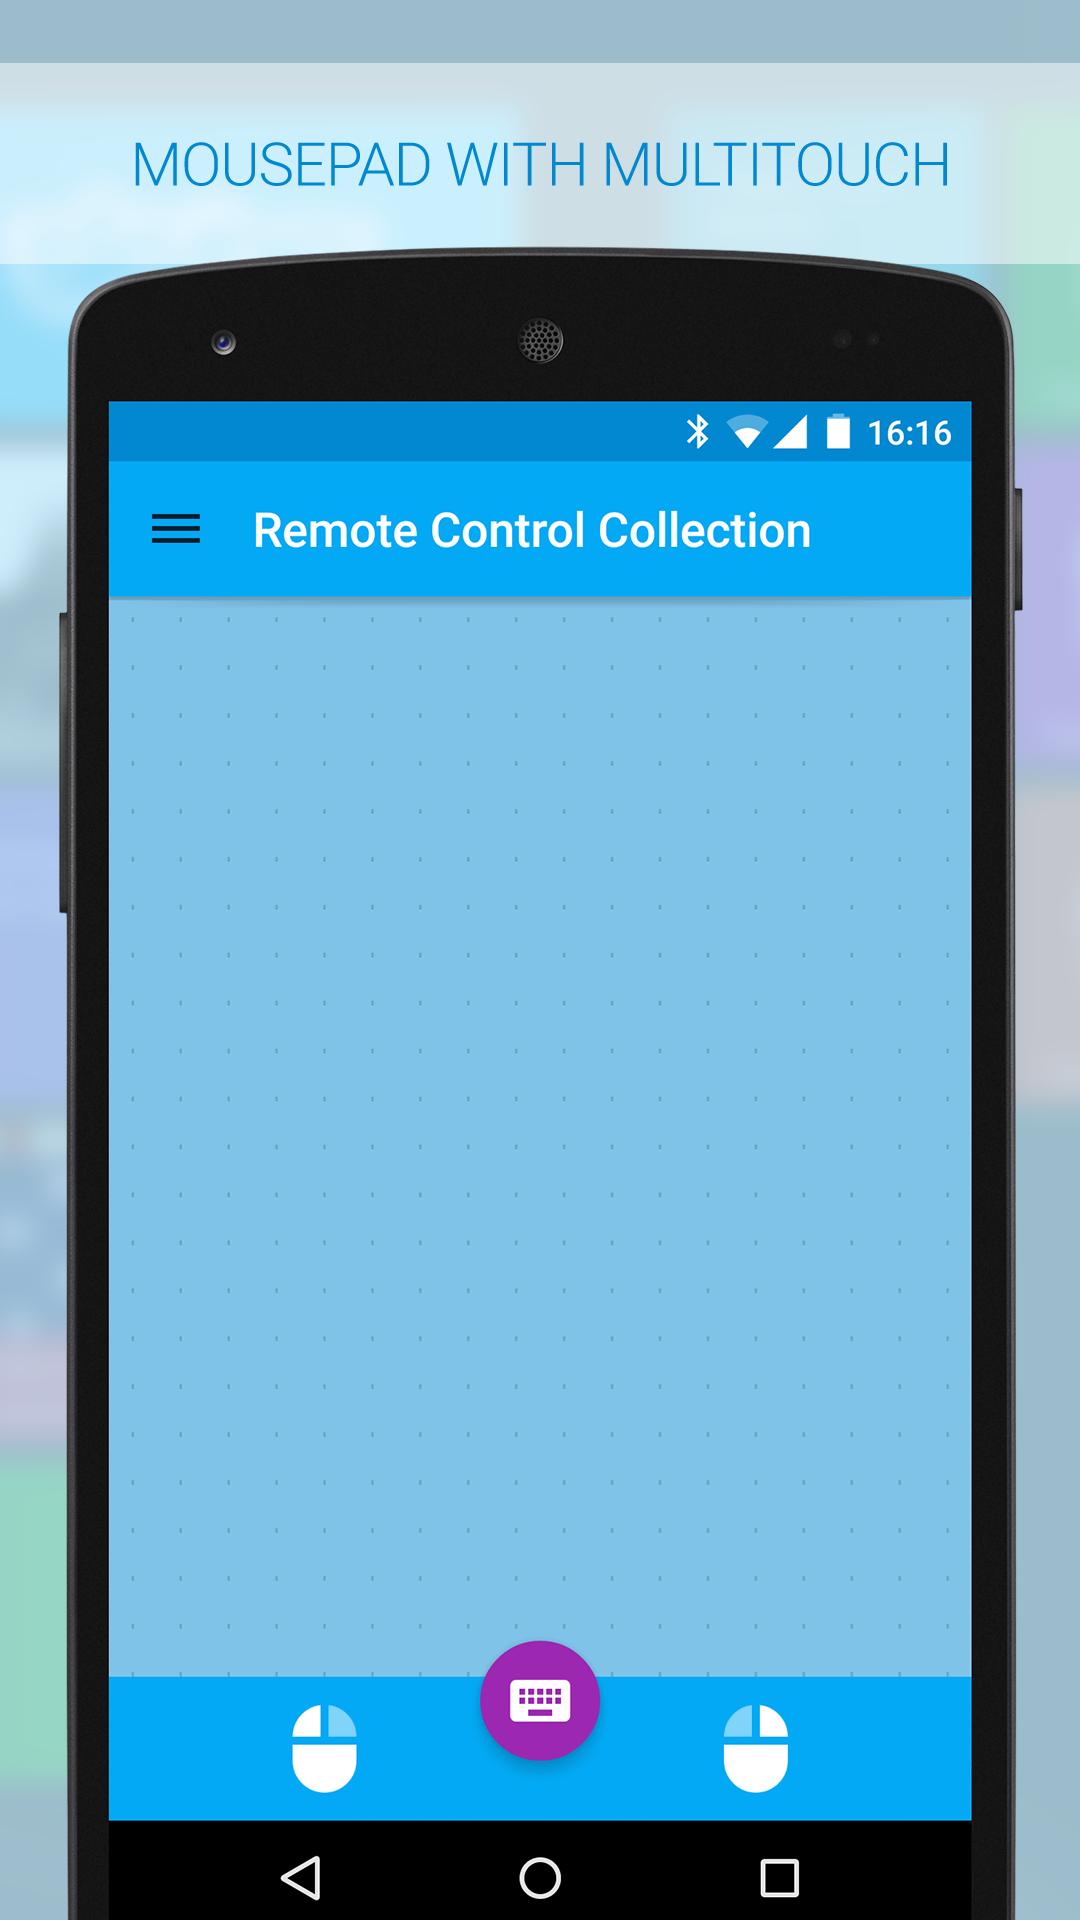 Remote Control collection. Control collection.